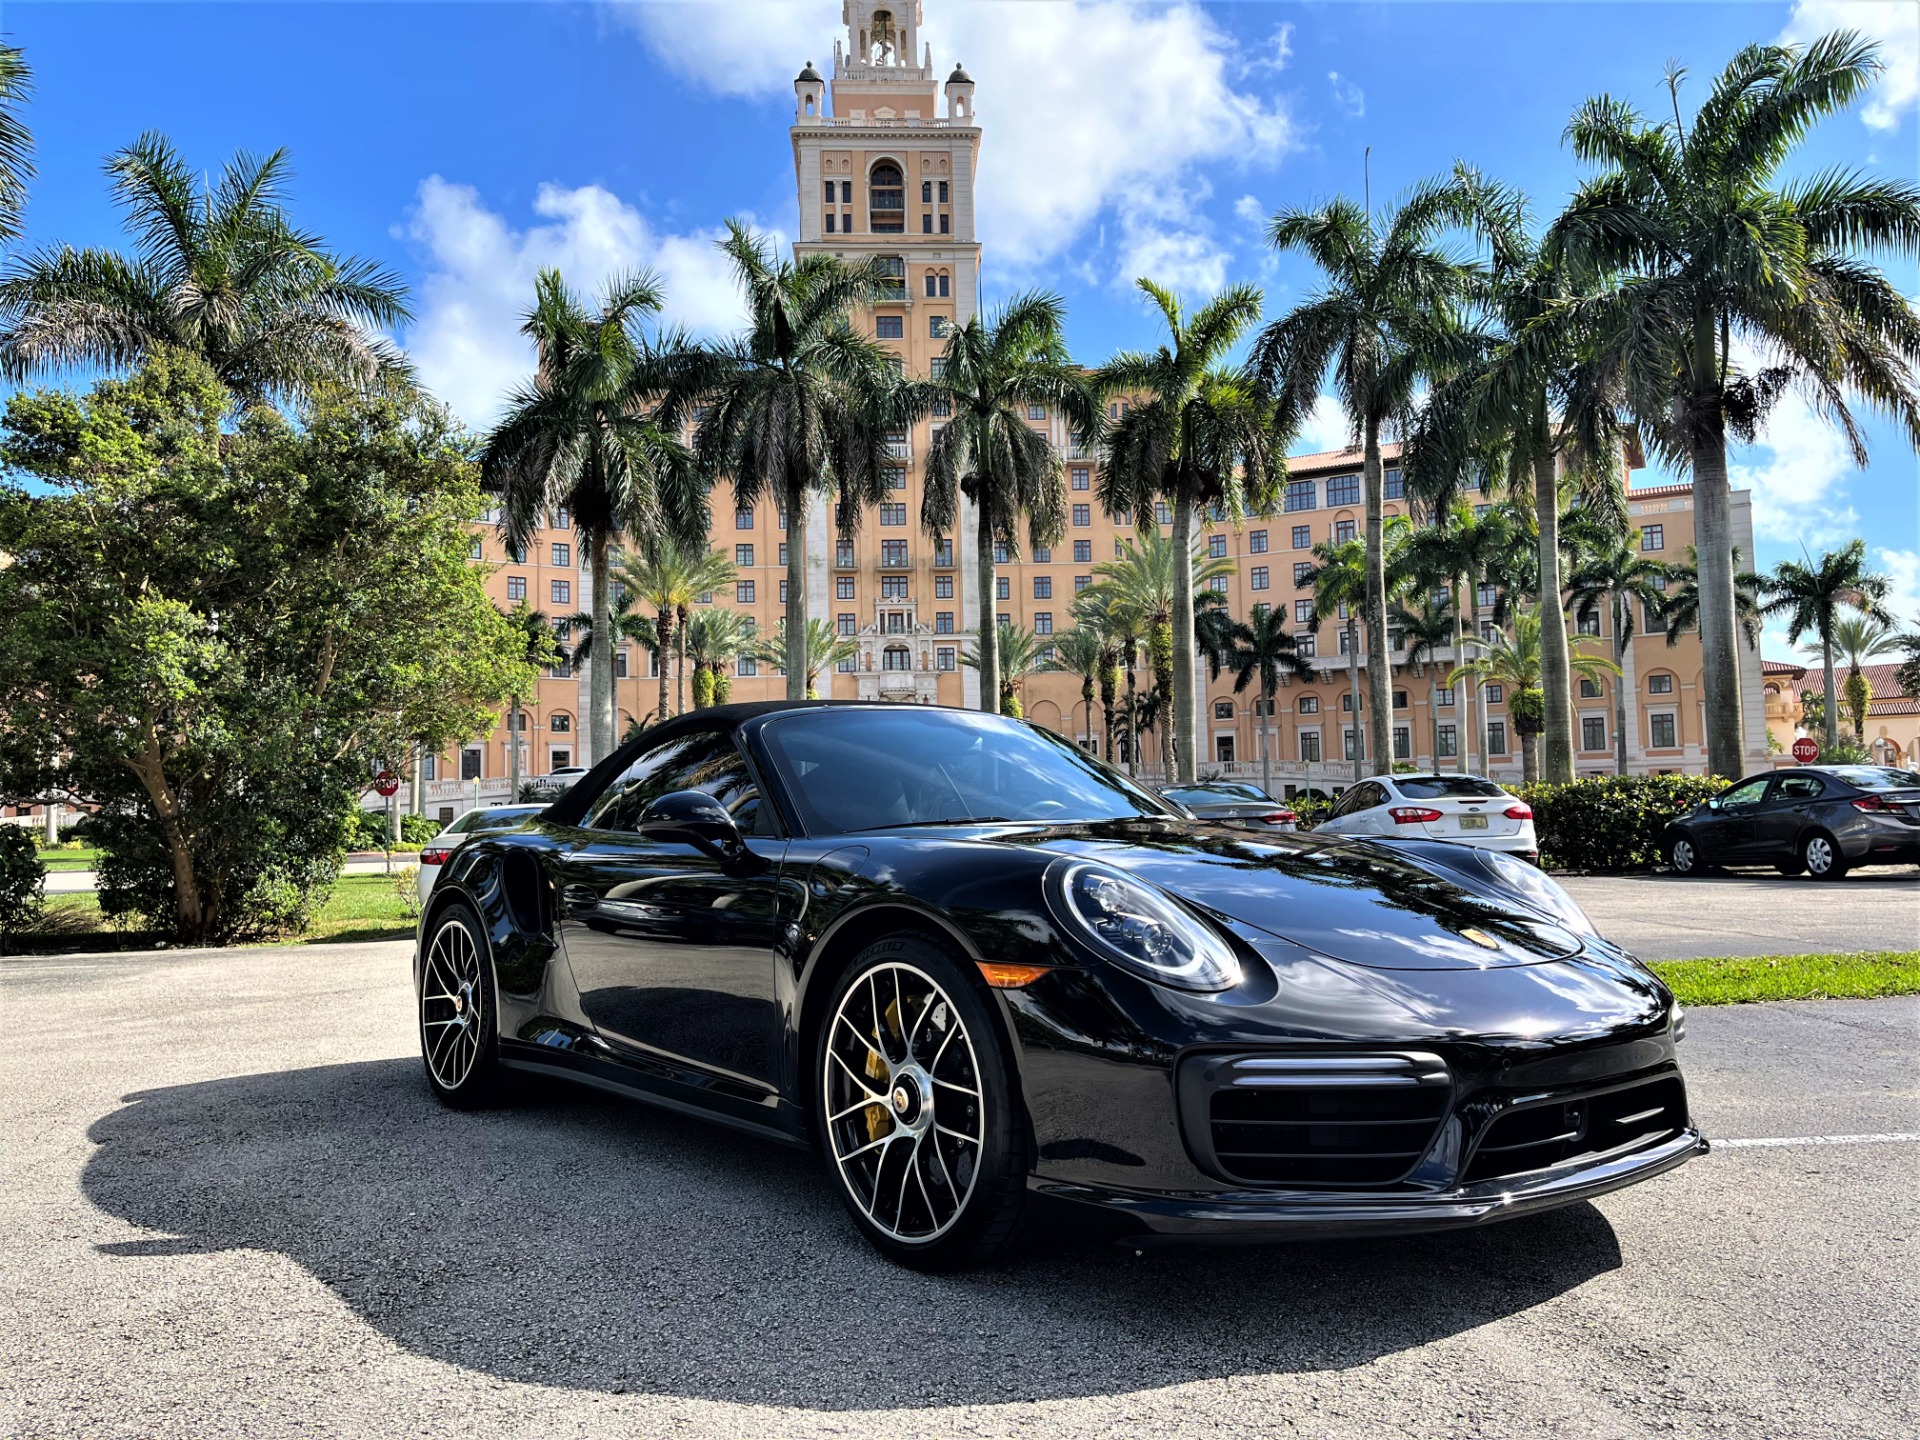 Used 2019 Porsche 911 Turbo S for sale Sold at The Gables Sports Cars in Miami FL 33146 3